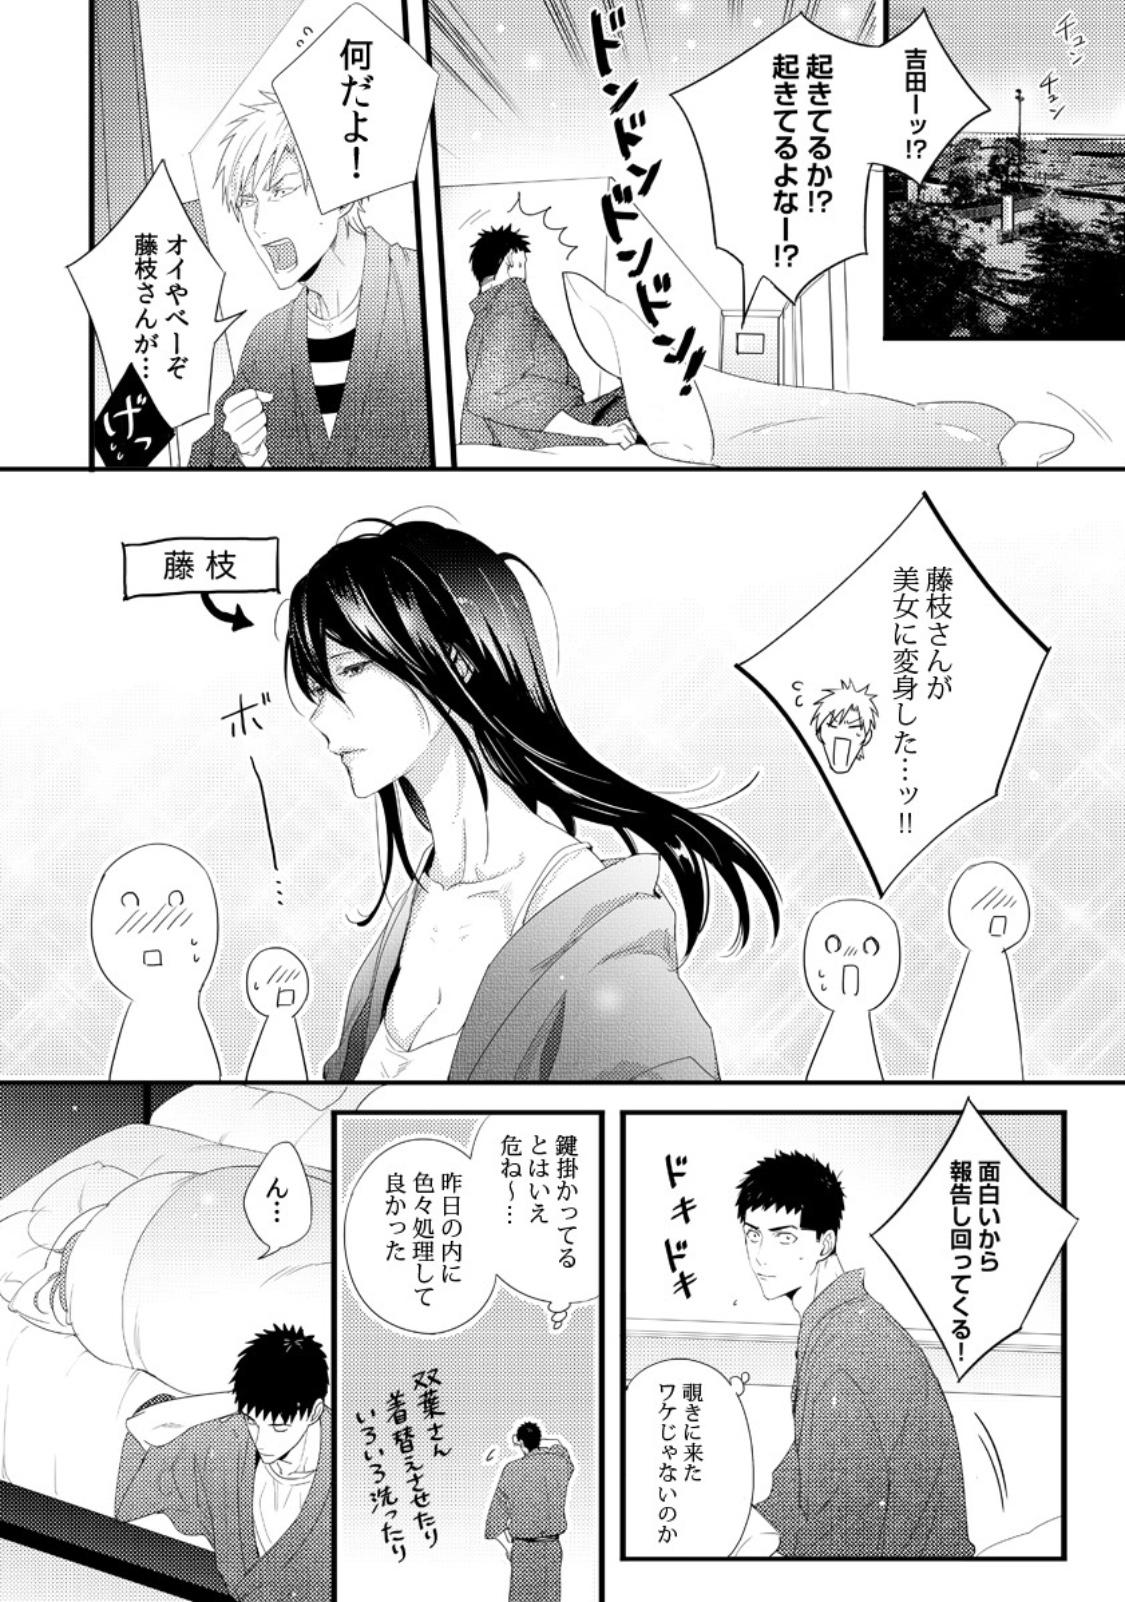 Please Let Me Hold You Futaba-San! Ch. 1+2 23